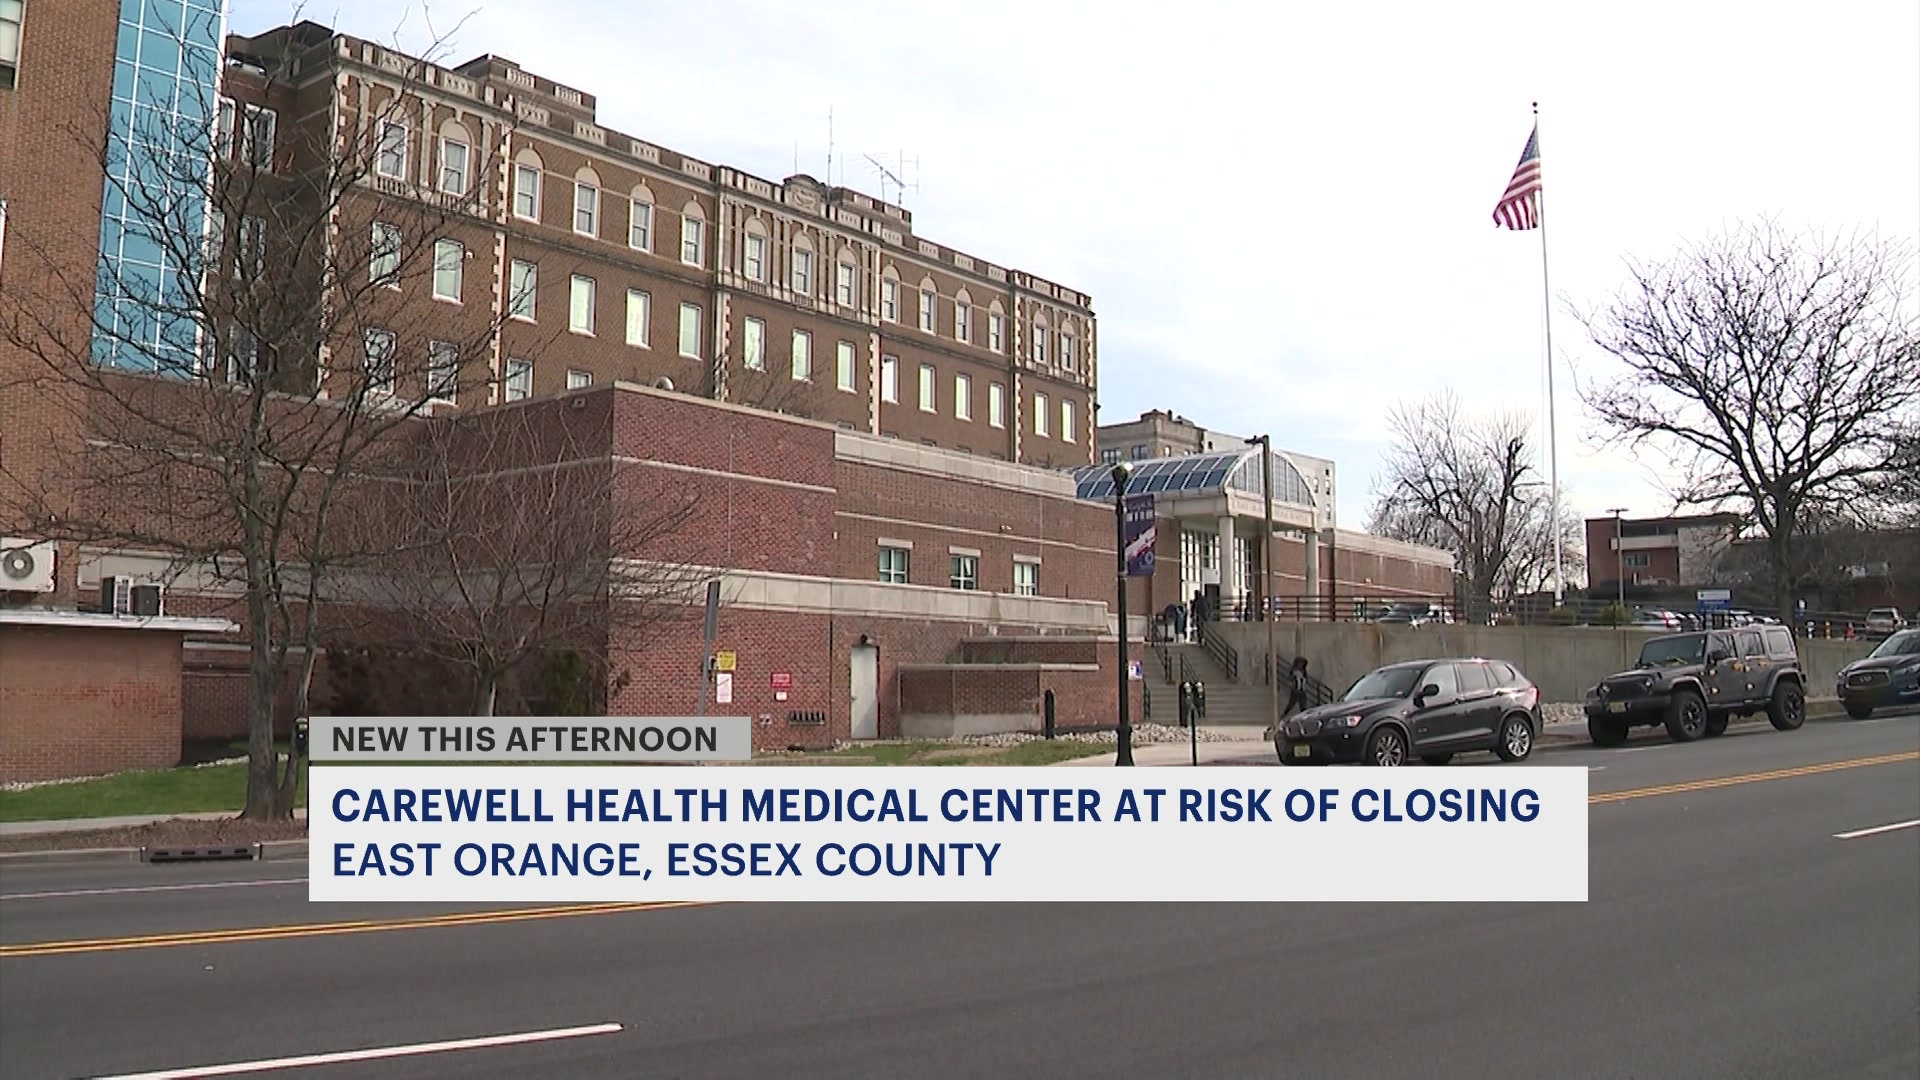 Department of Health threatens closure of CareWell Health Medical Center in East Orange